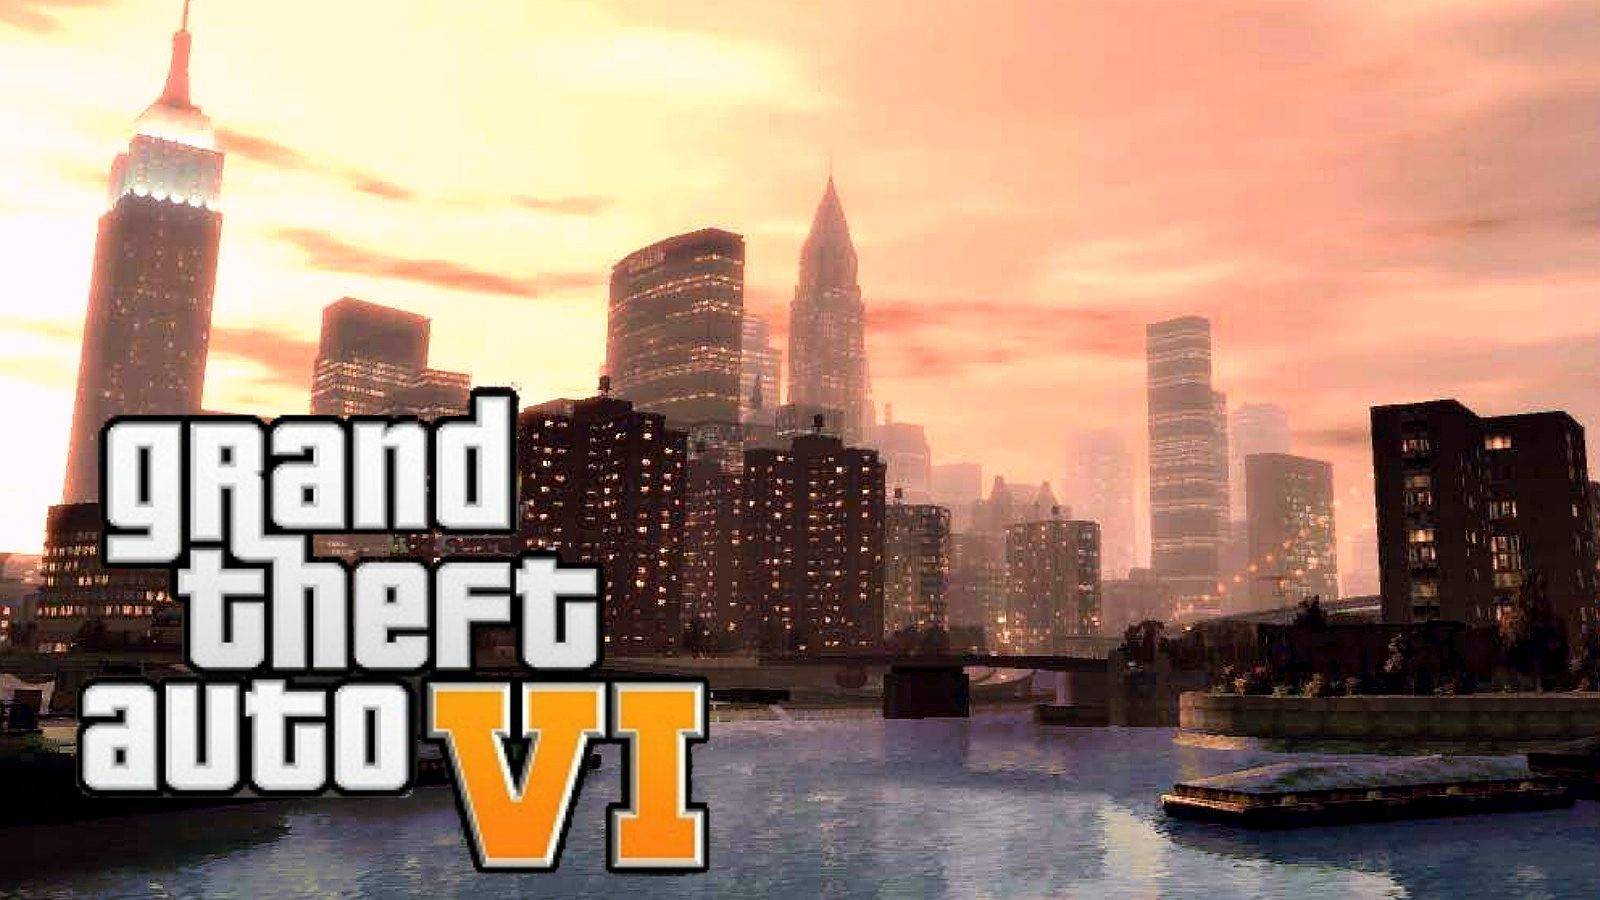 Buy GTA 6 – GRAND THEFT AUTO VI PC CD Key from $56.49 - Cheapest Price